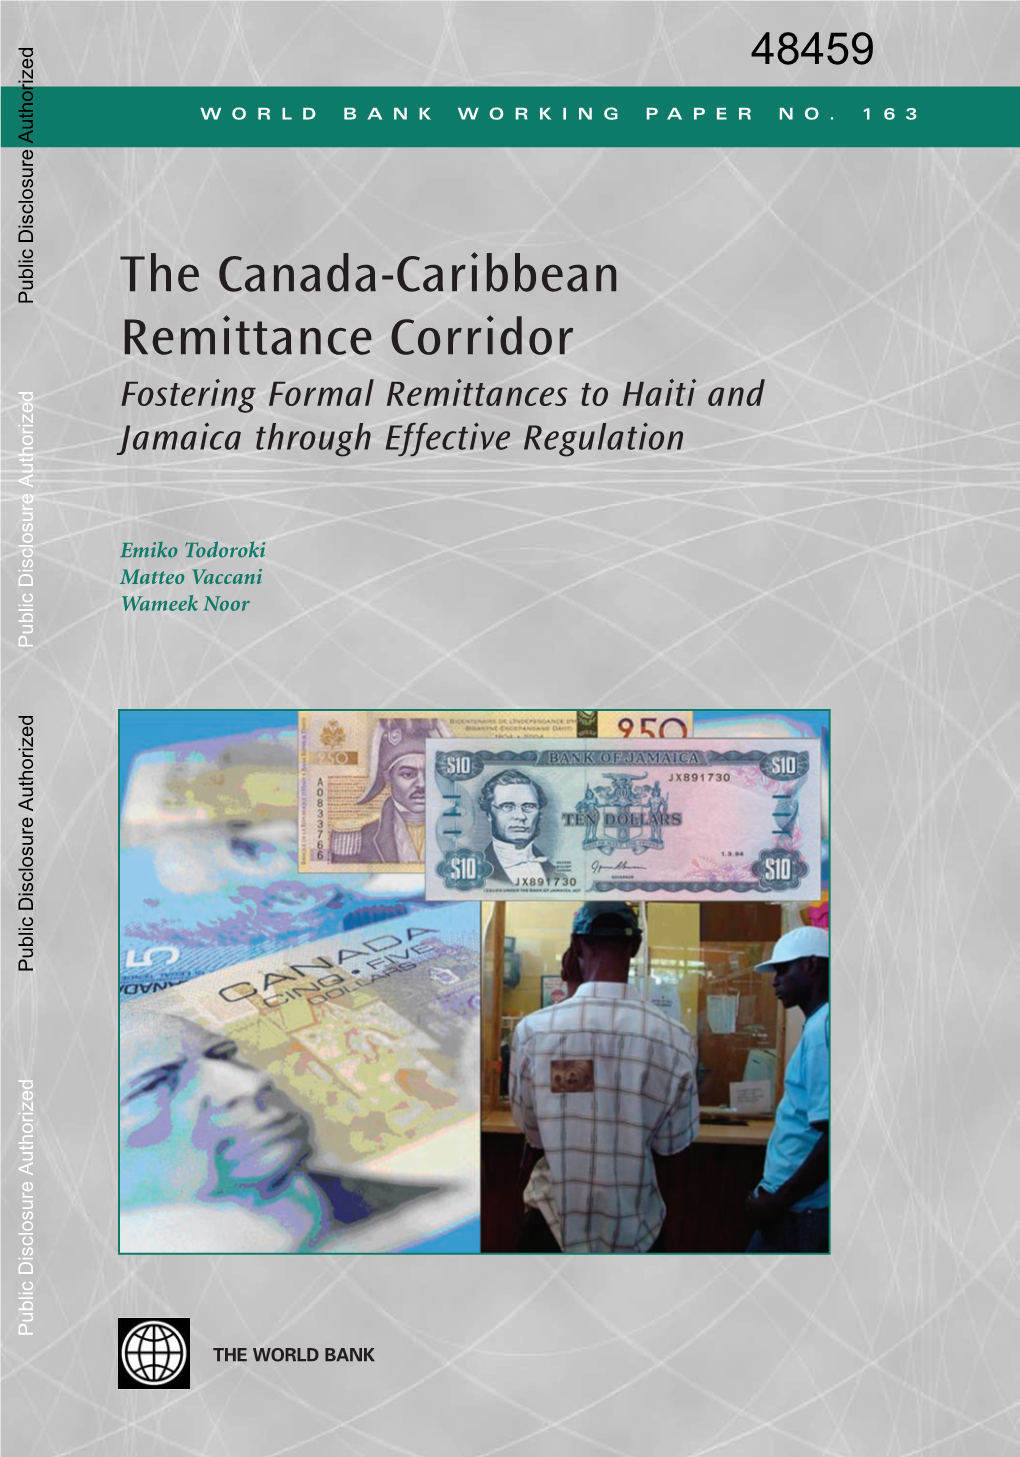 The Canada-Caribbean Remittance Corridor Fostering Formal Remittances to Haiti and Jamaica Through Effective Regulation